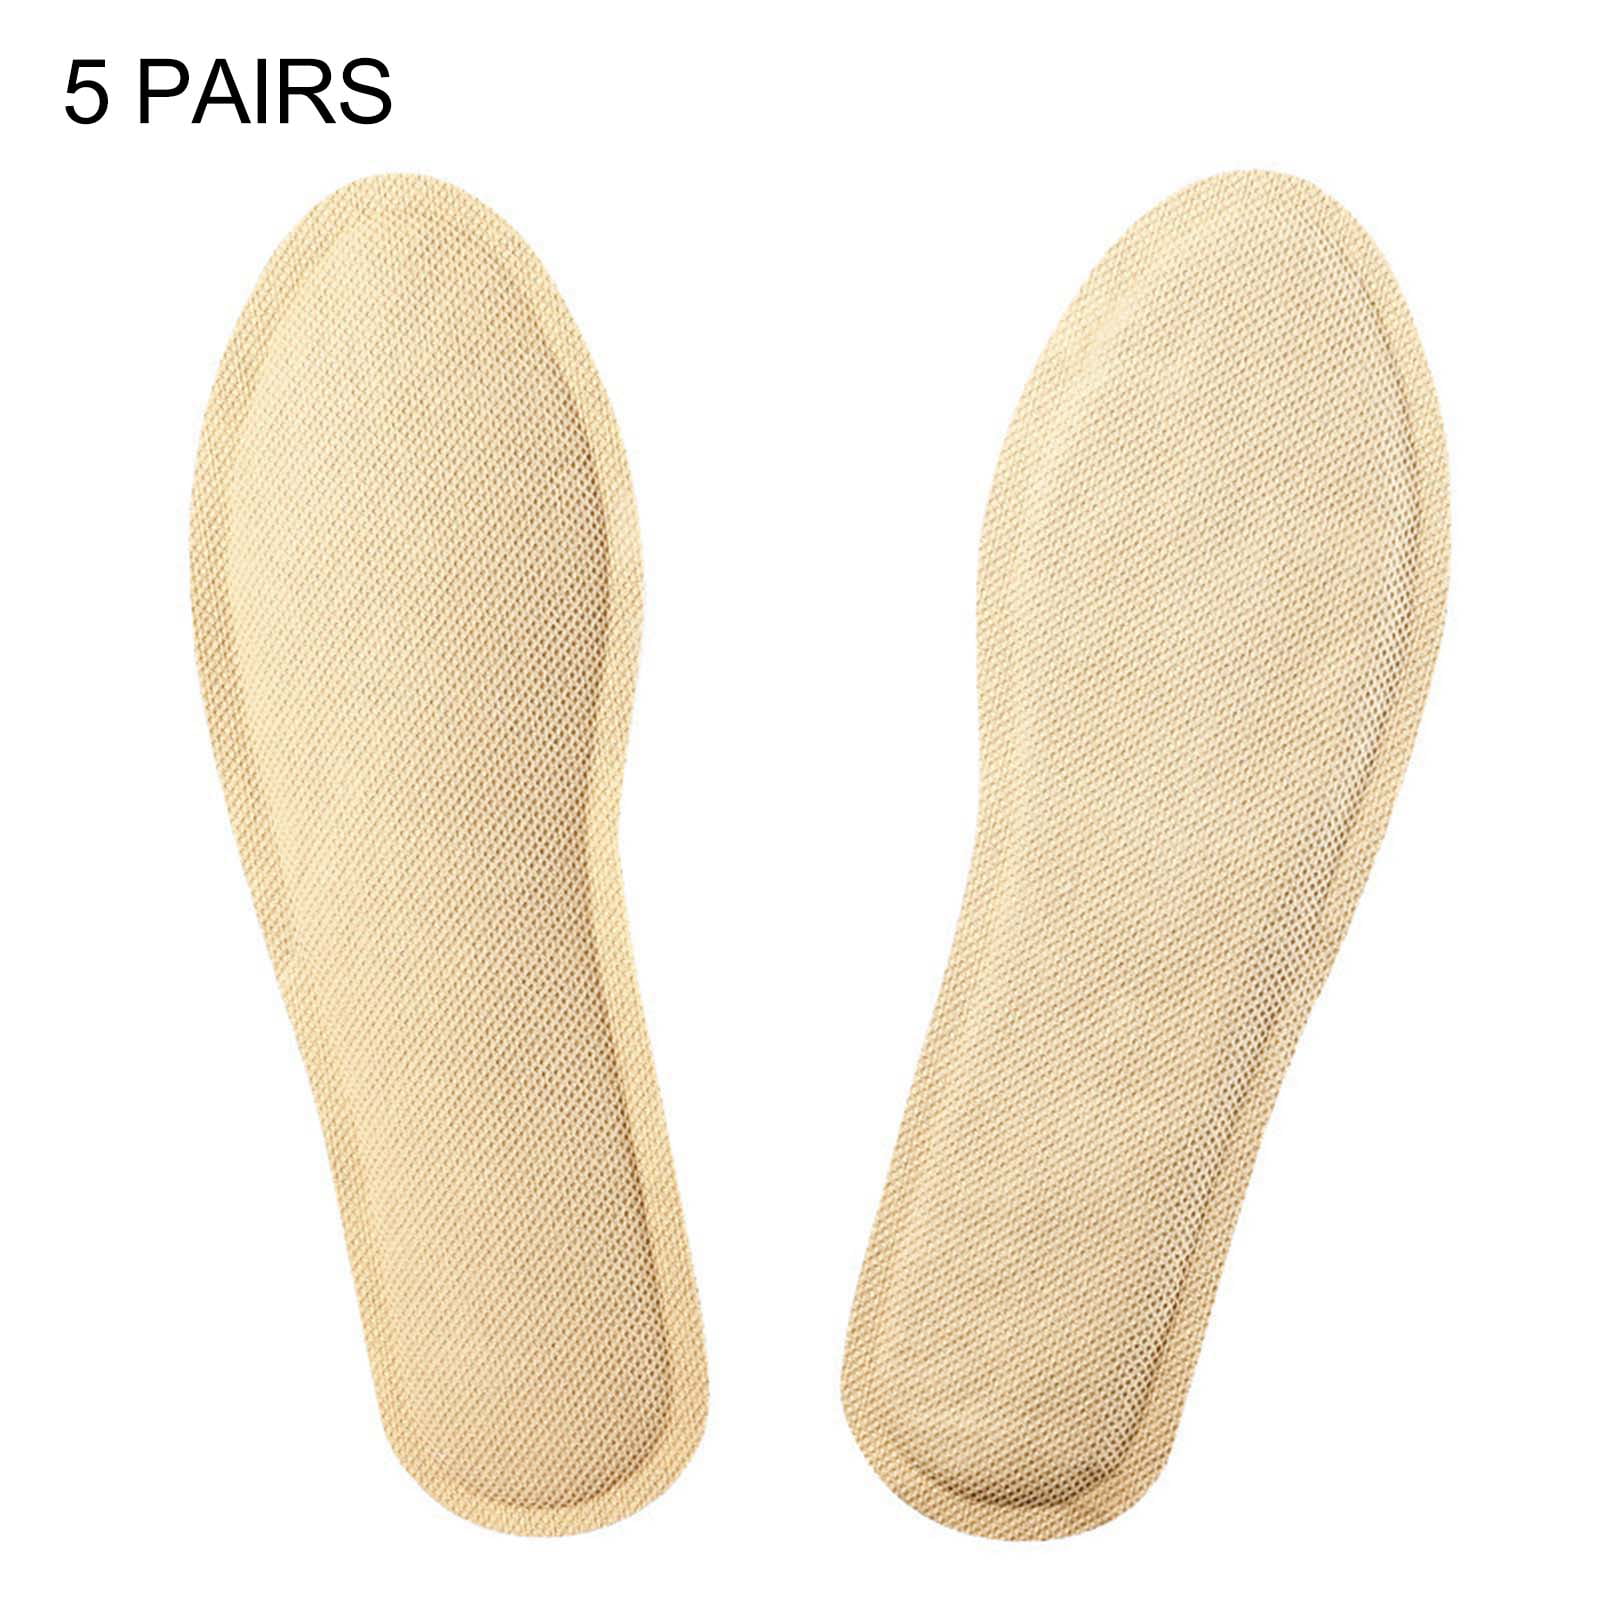 Self-Heating Insoles Winter Warm Shoe Insert Spontaneous Heated Insoles 